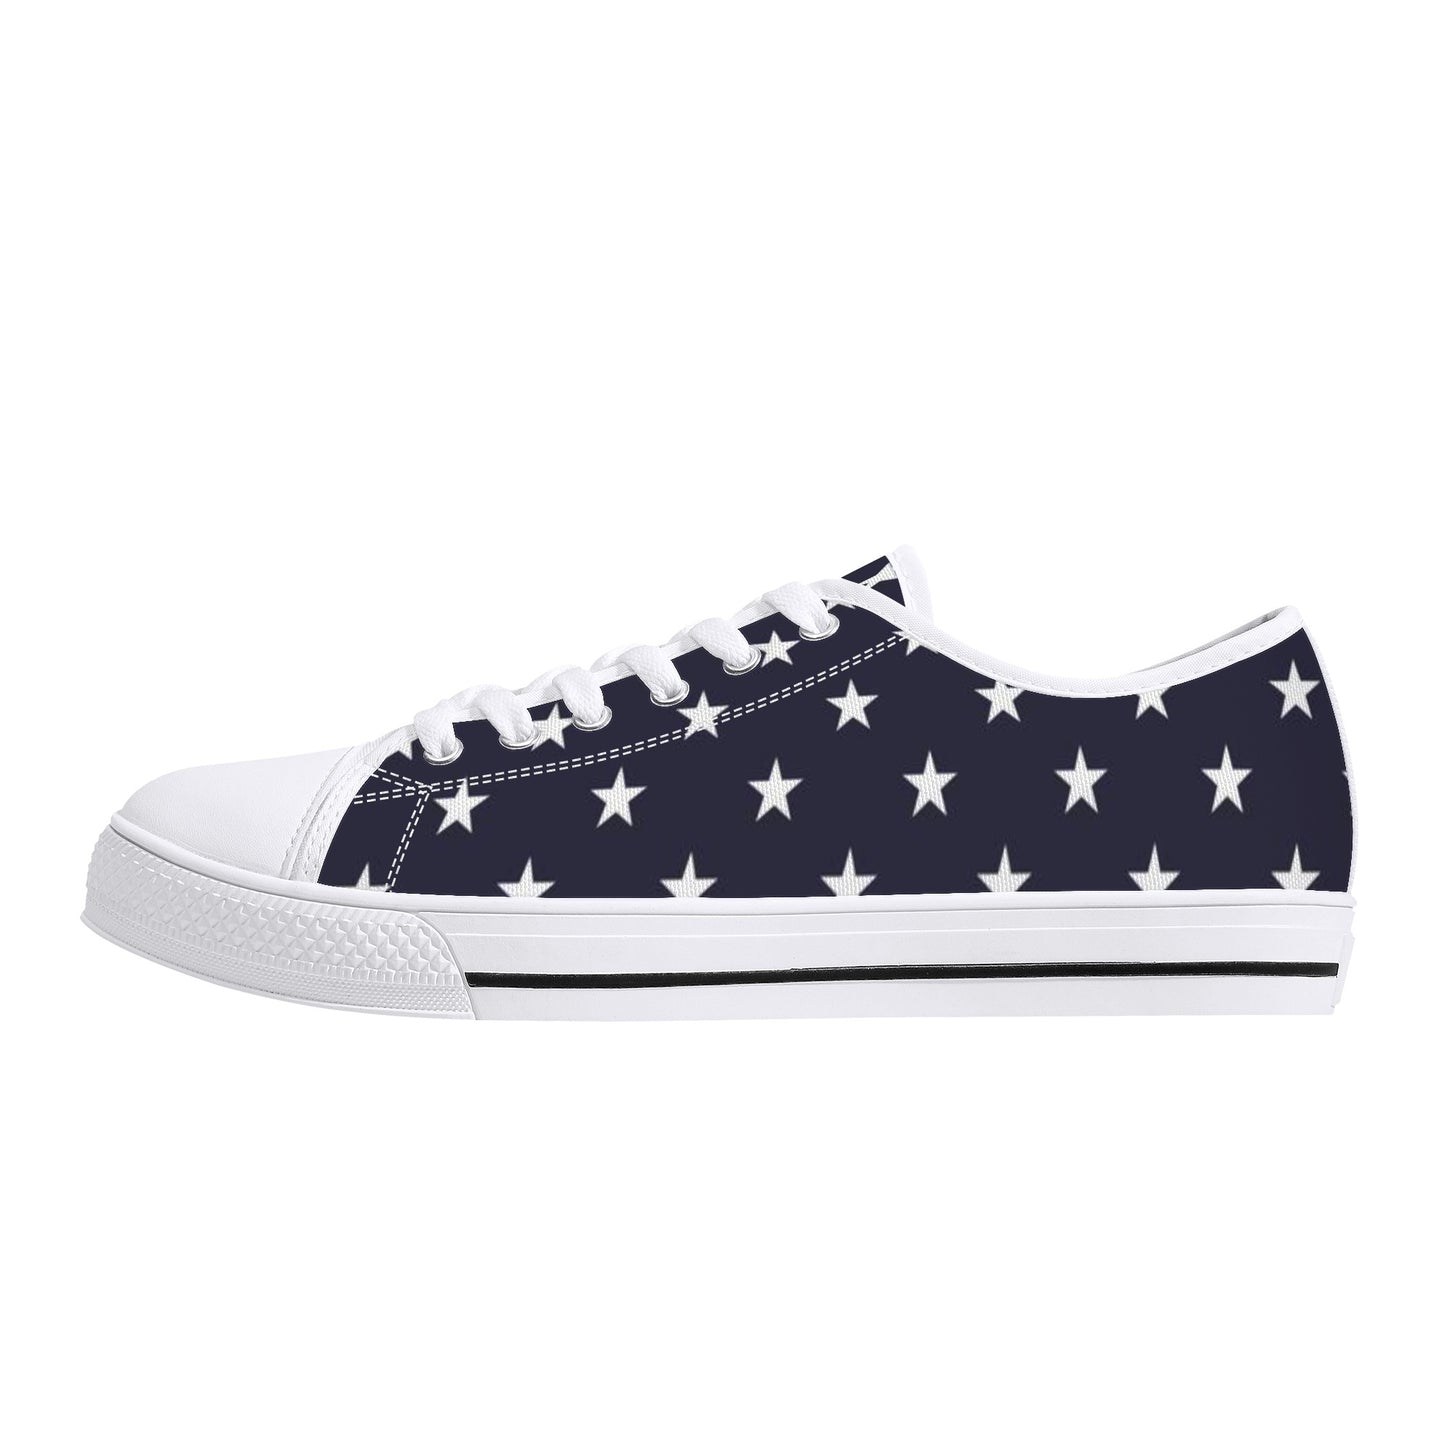 American Flag Women Shoes, Stars Stripes Red White Blue Patriotic USA Sneakers Canvas White Low Top Lace Up Girls Aesthetic Flat Shoes Starcove Fashion